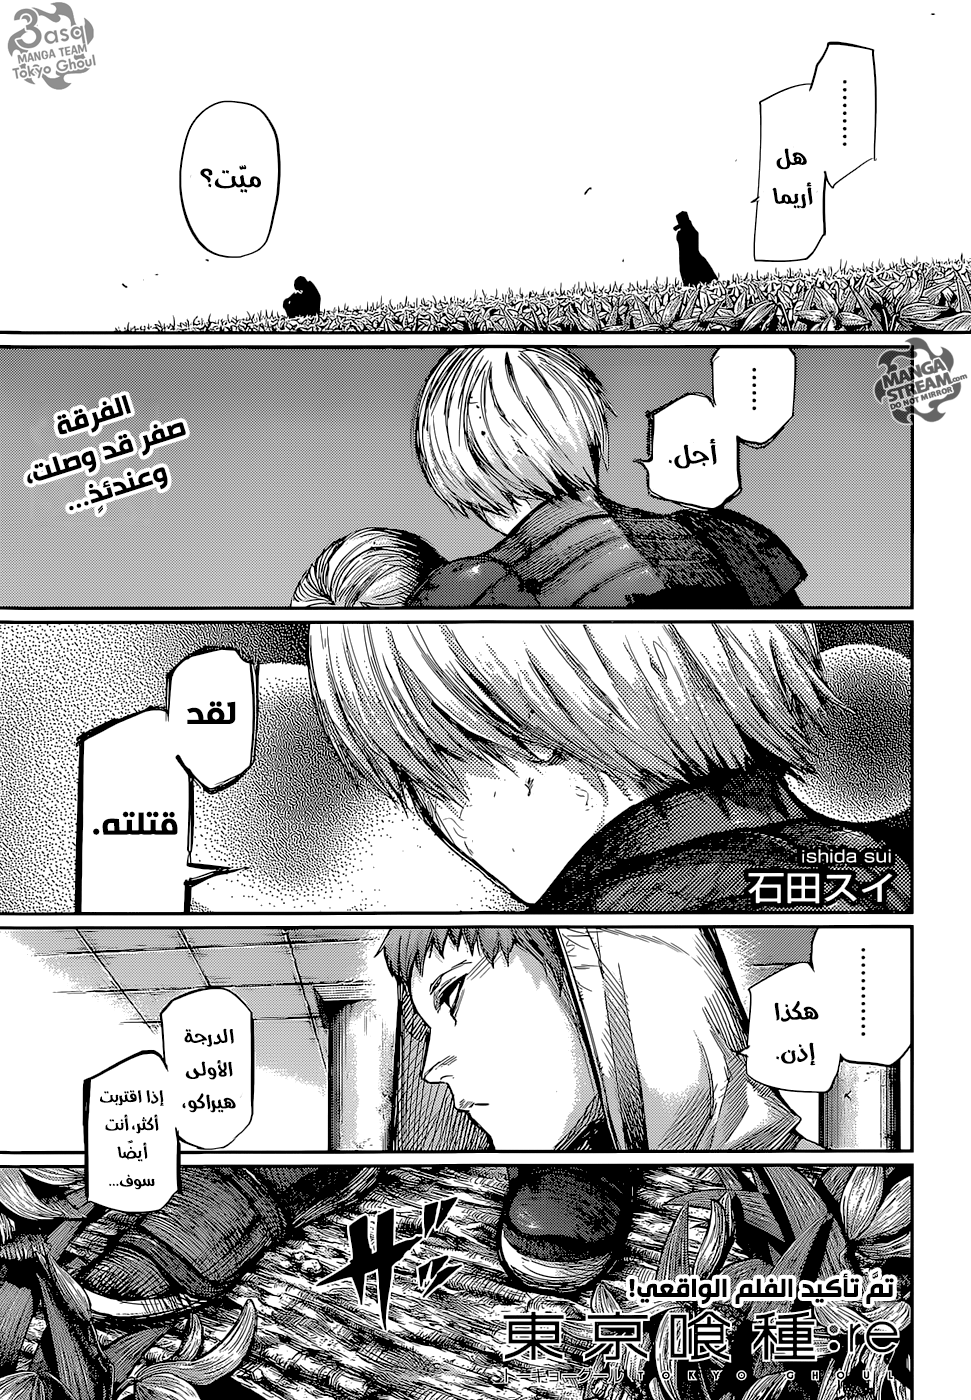 Tokyo Ghoul: Re: Chapter 85 - Page 1